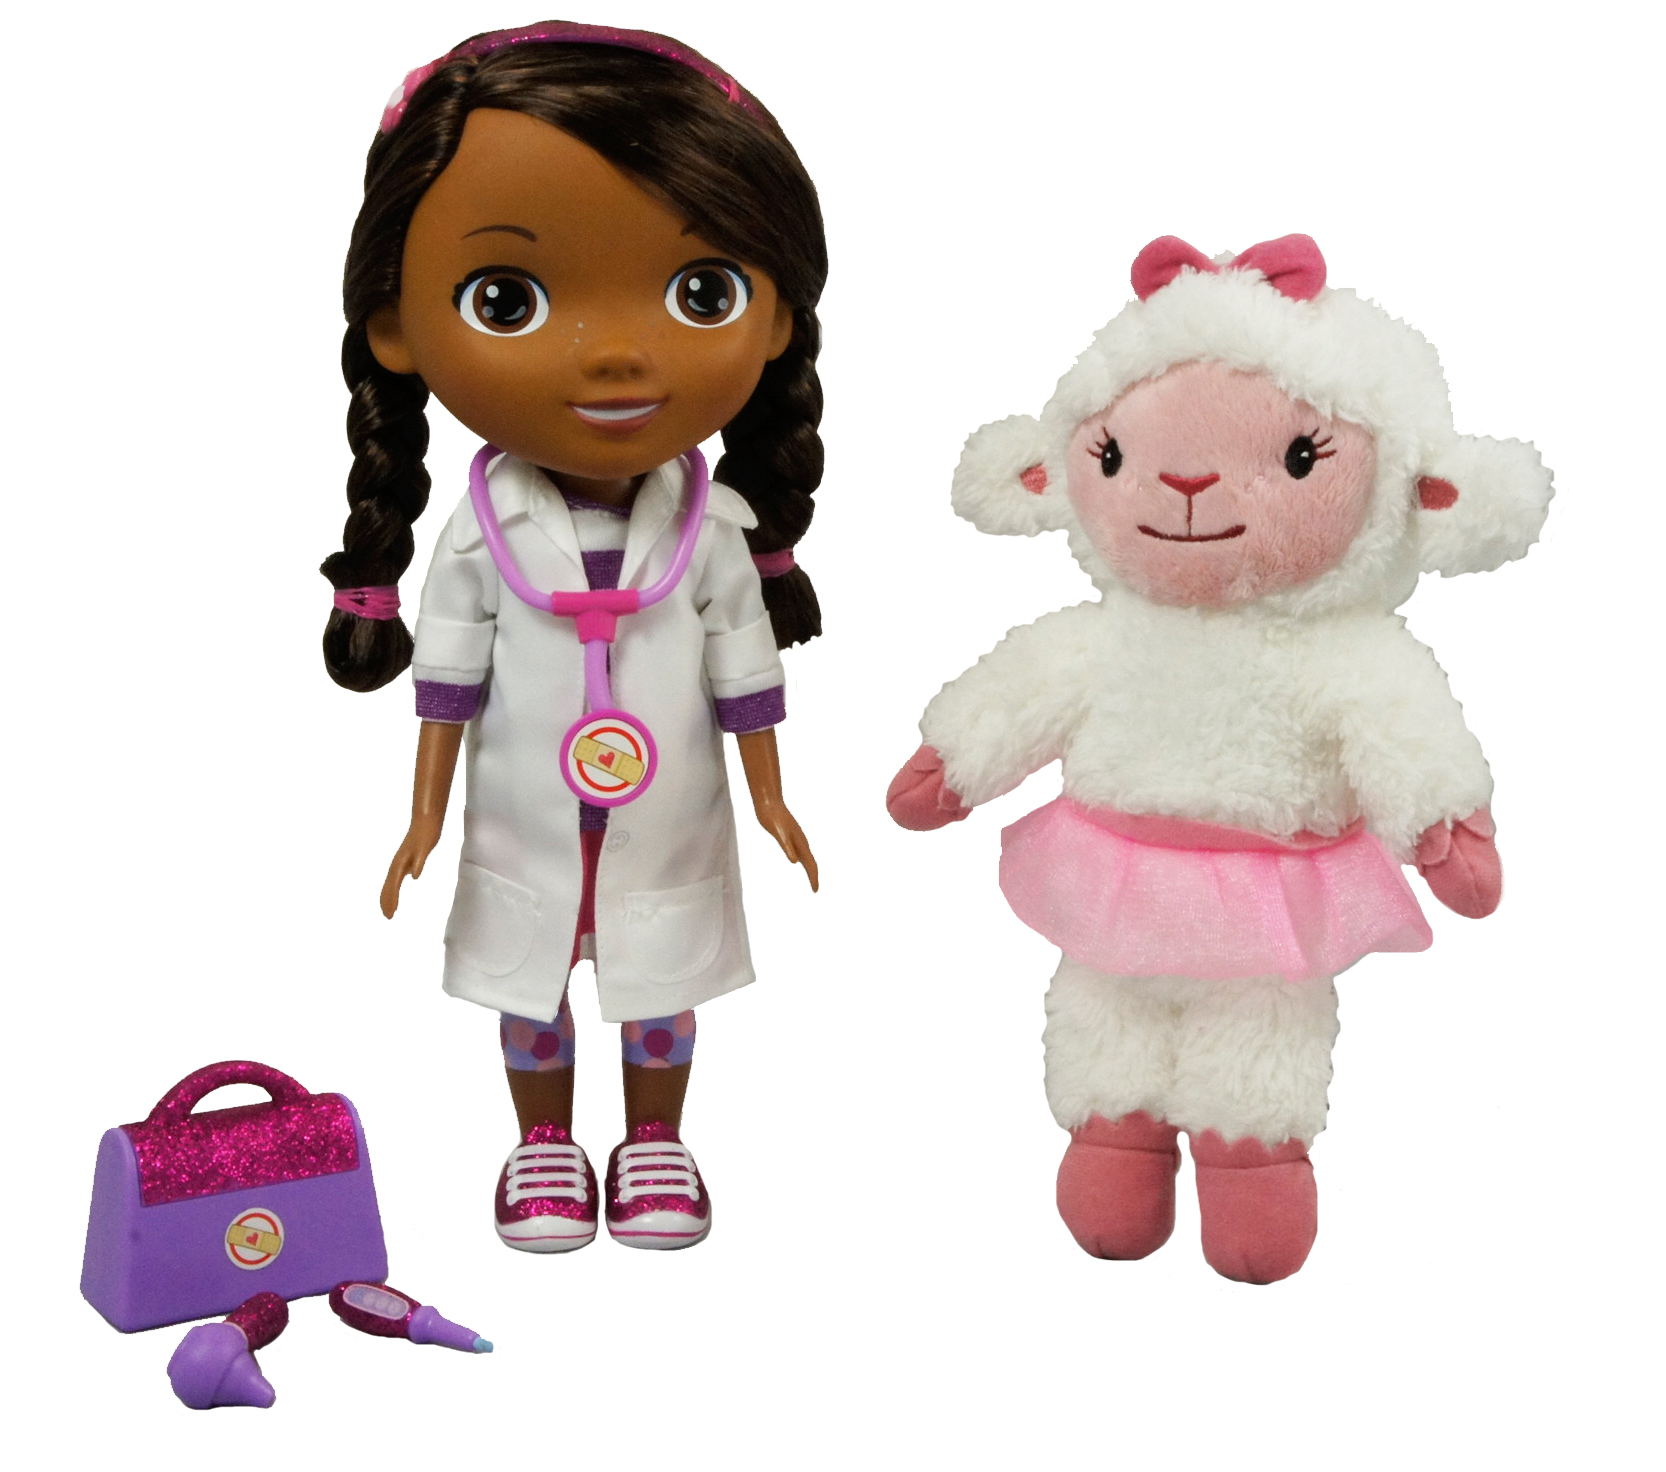 Doc Mcstuffins Time for Your Check Up.